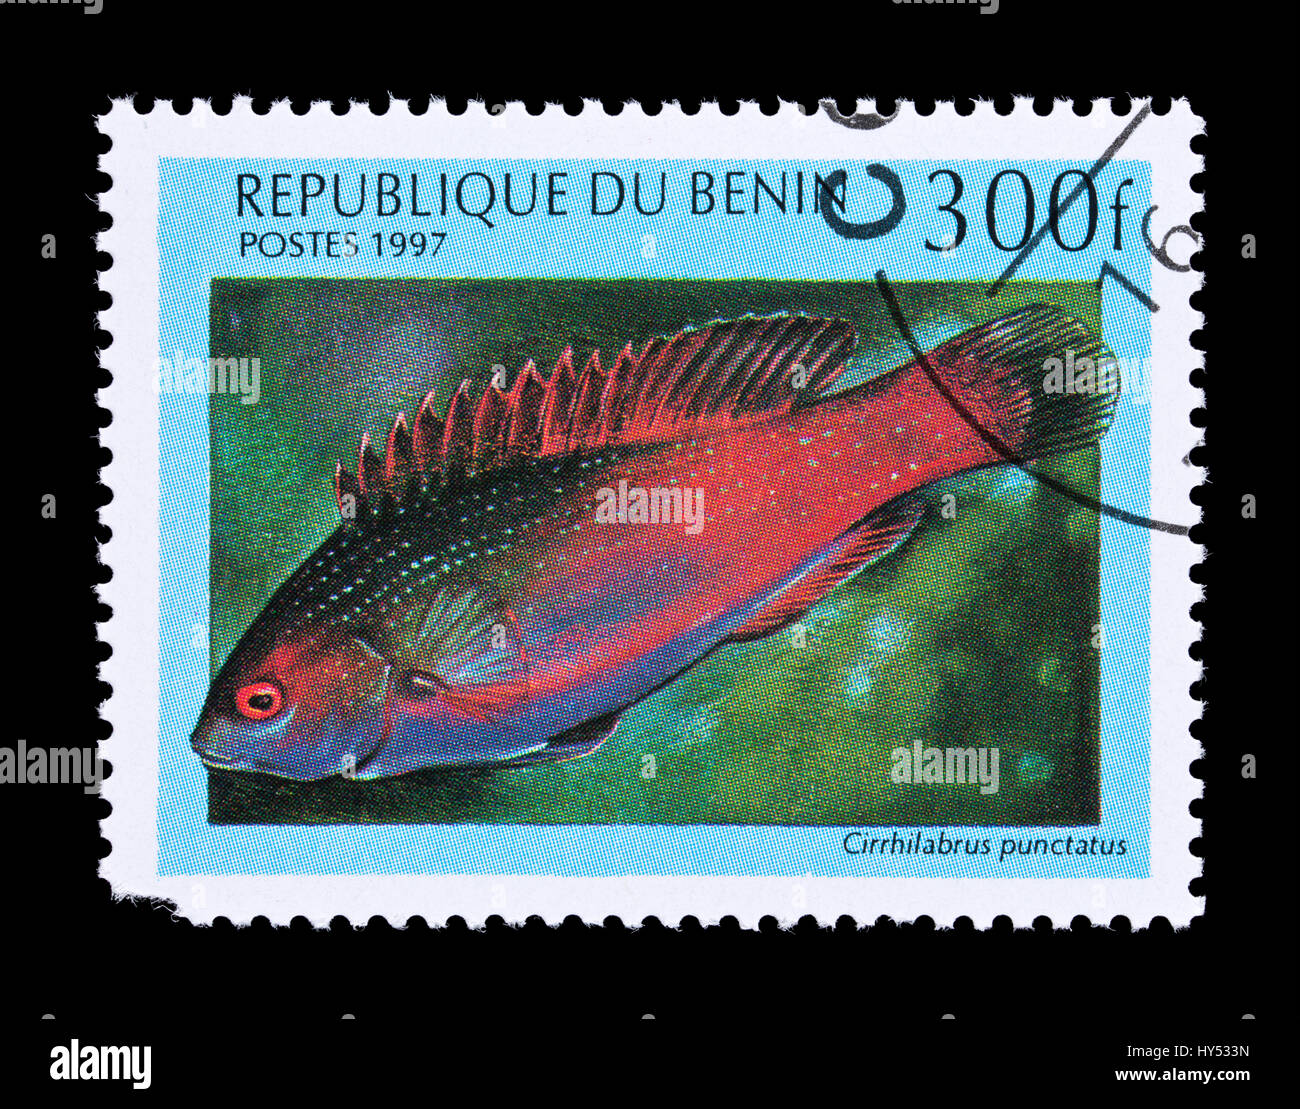 Postage stamp from Benin depicting a Dotted wrasse (Cirrhilabrus punctatus) Stock Photo